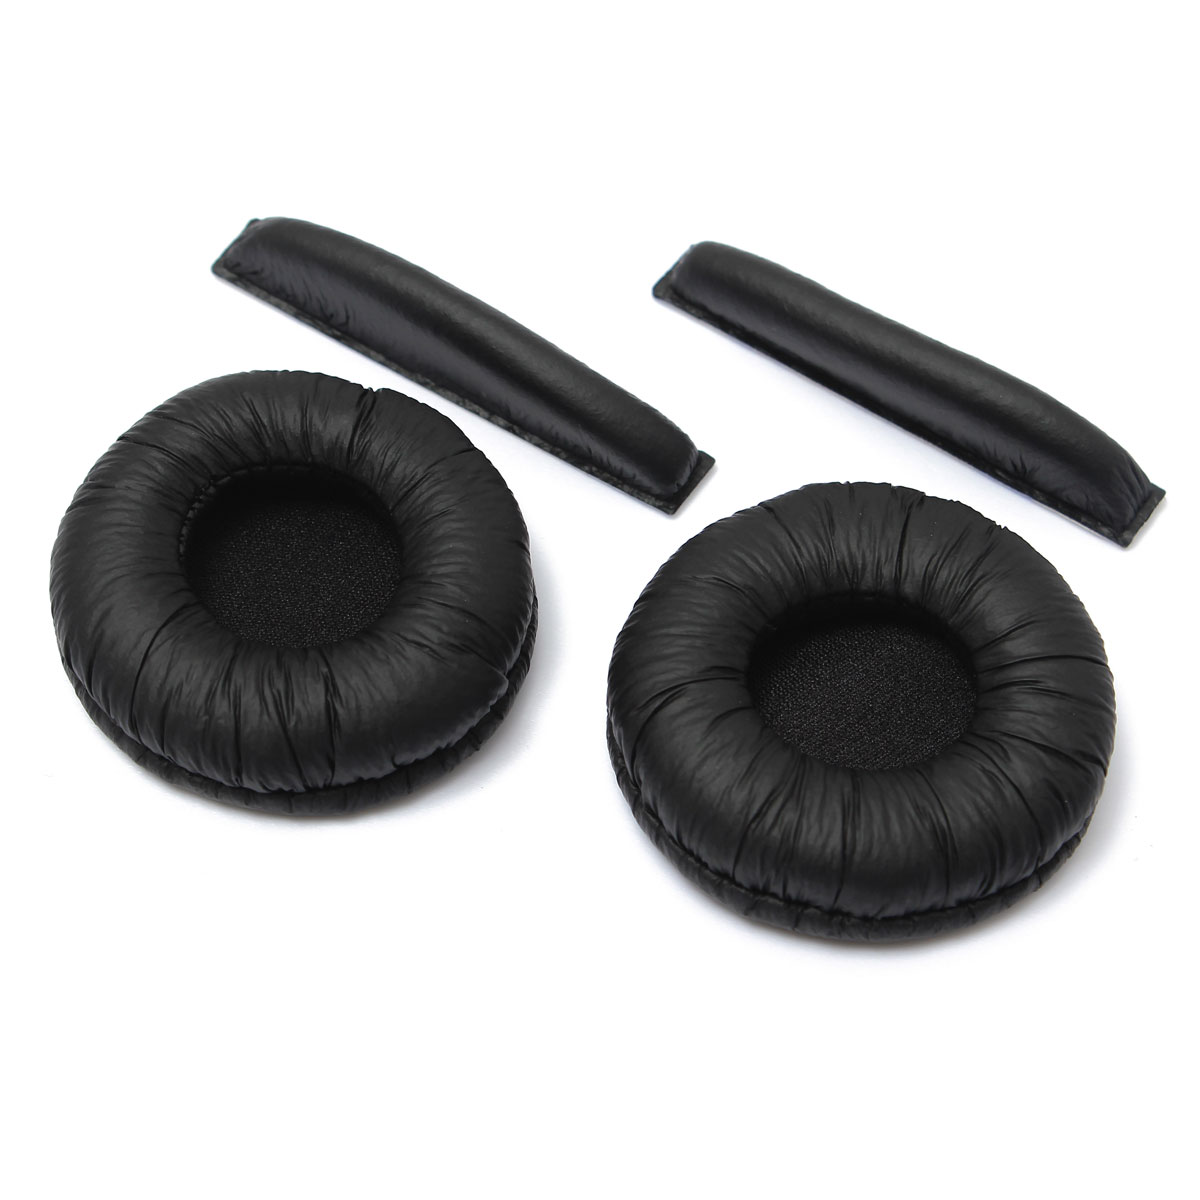 LEORY-1-Pair-For-Sennheiser-PX100-PX200-Headphone-Replacement-Ear-Pads-Cover-Headband-Cushion-1782024-12